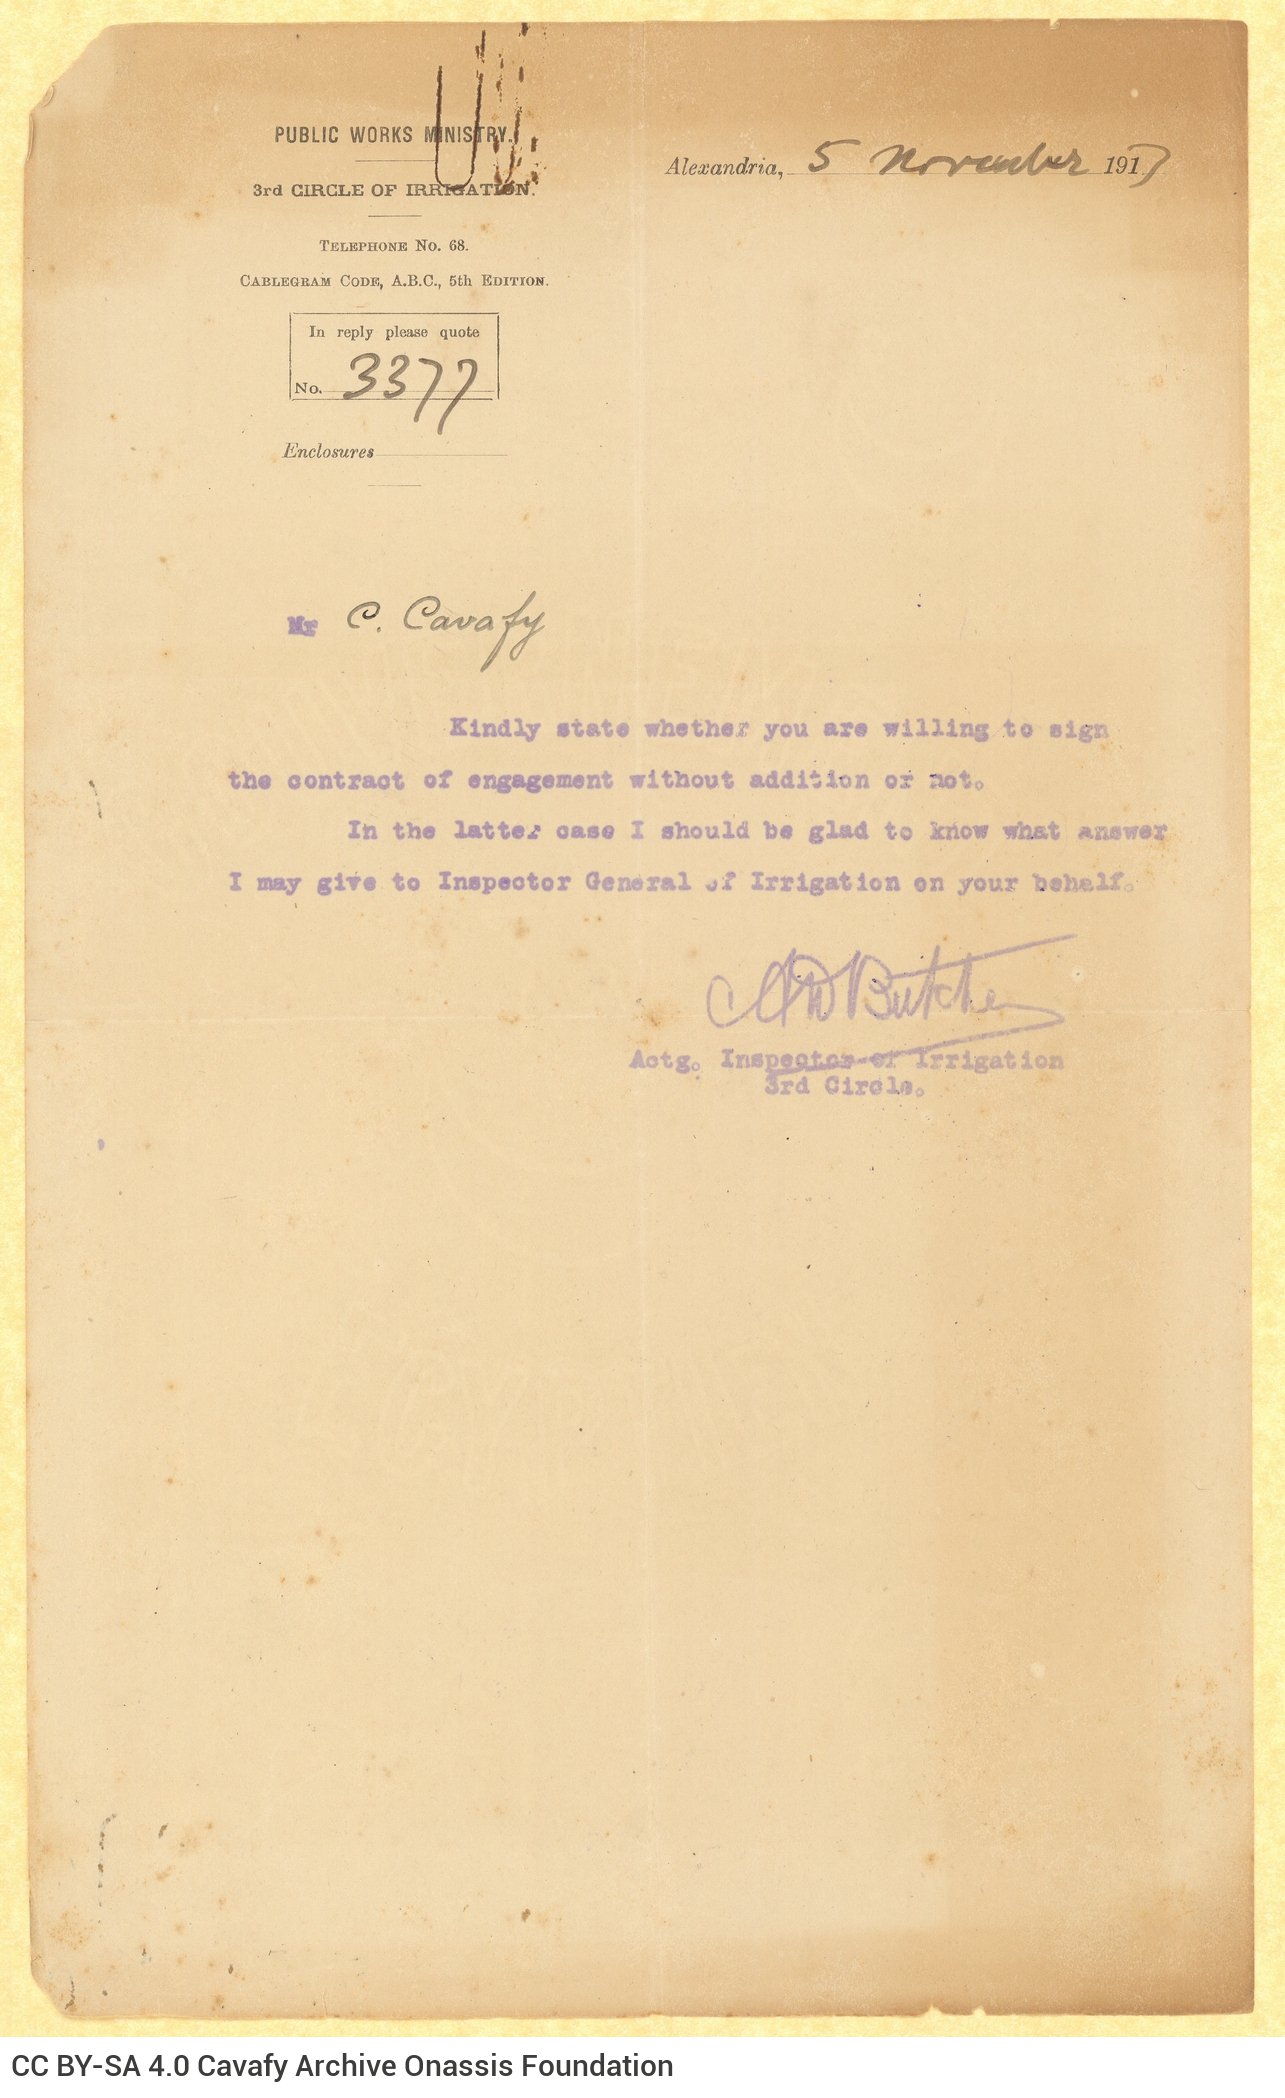 Polygraphed copy of a typewritten official letter to Cavafy, regarding the signing of an employment contract with the Irri